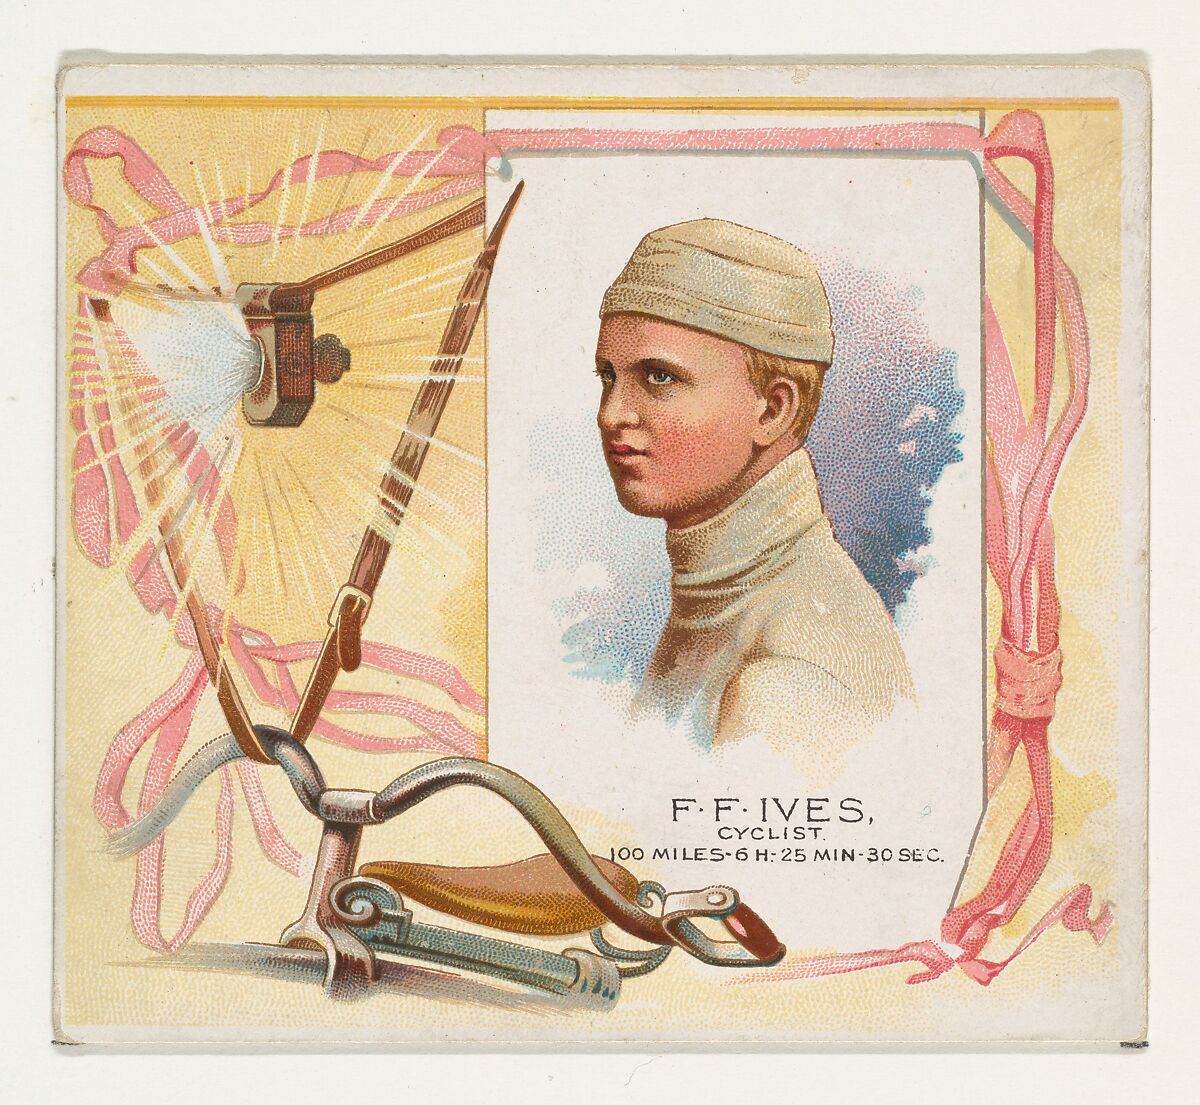 F.F. Ives, Cyclist, from World's Champions, Second Series (N43) for Allen & Ginter Cigarettes, Allen &amp; Ginter (American, Richmond, Virginia), Commercial lithograph 